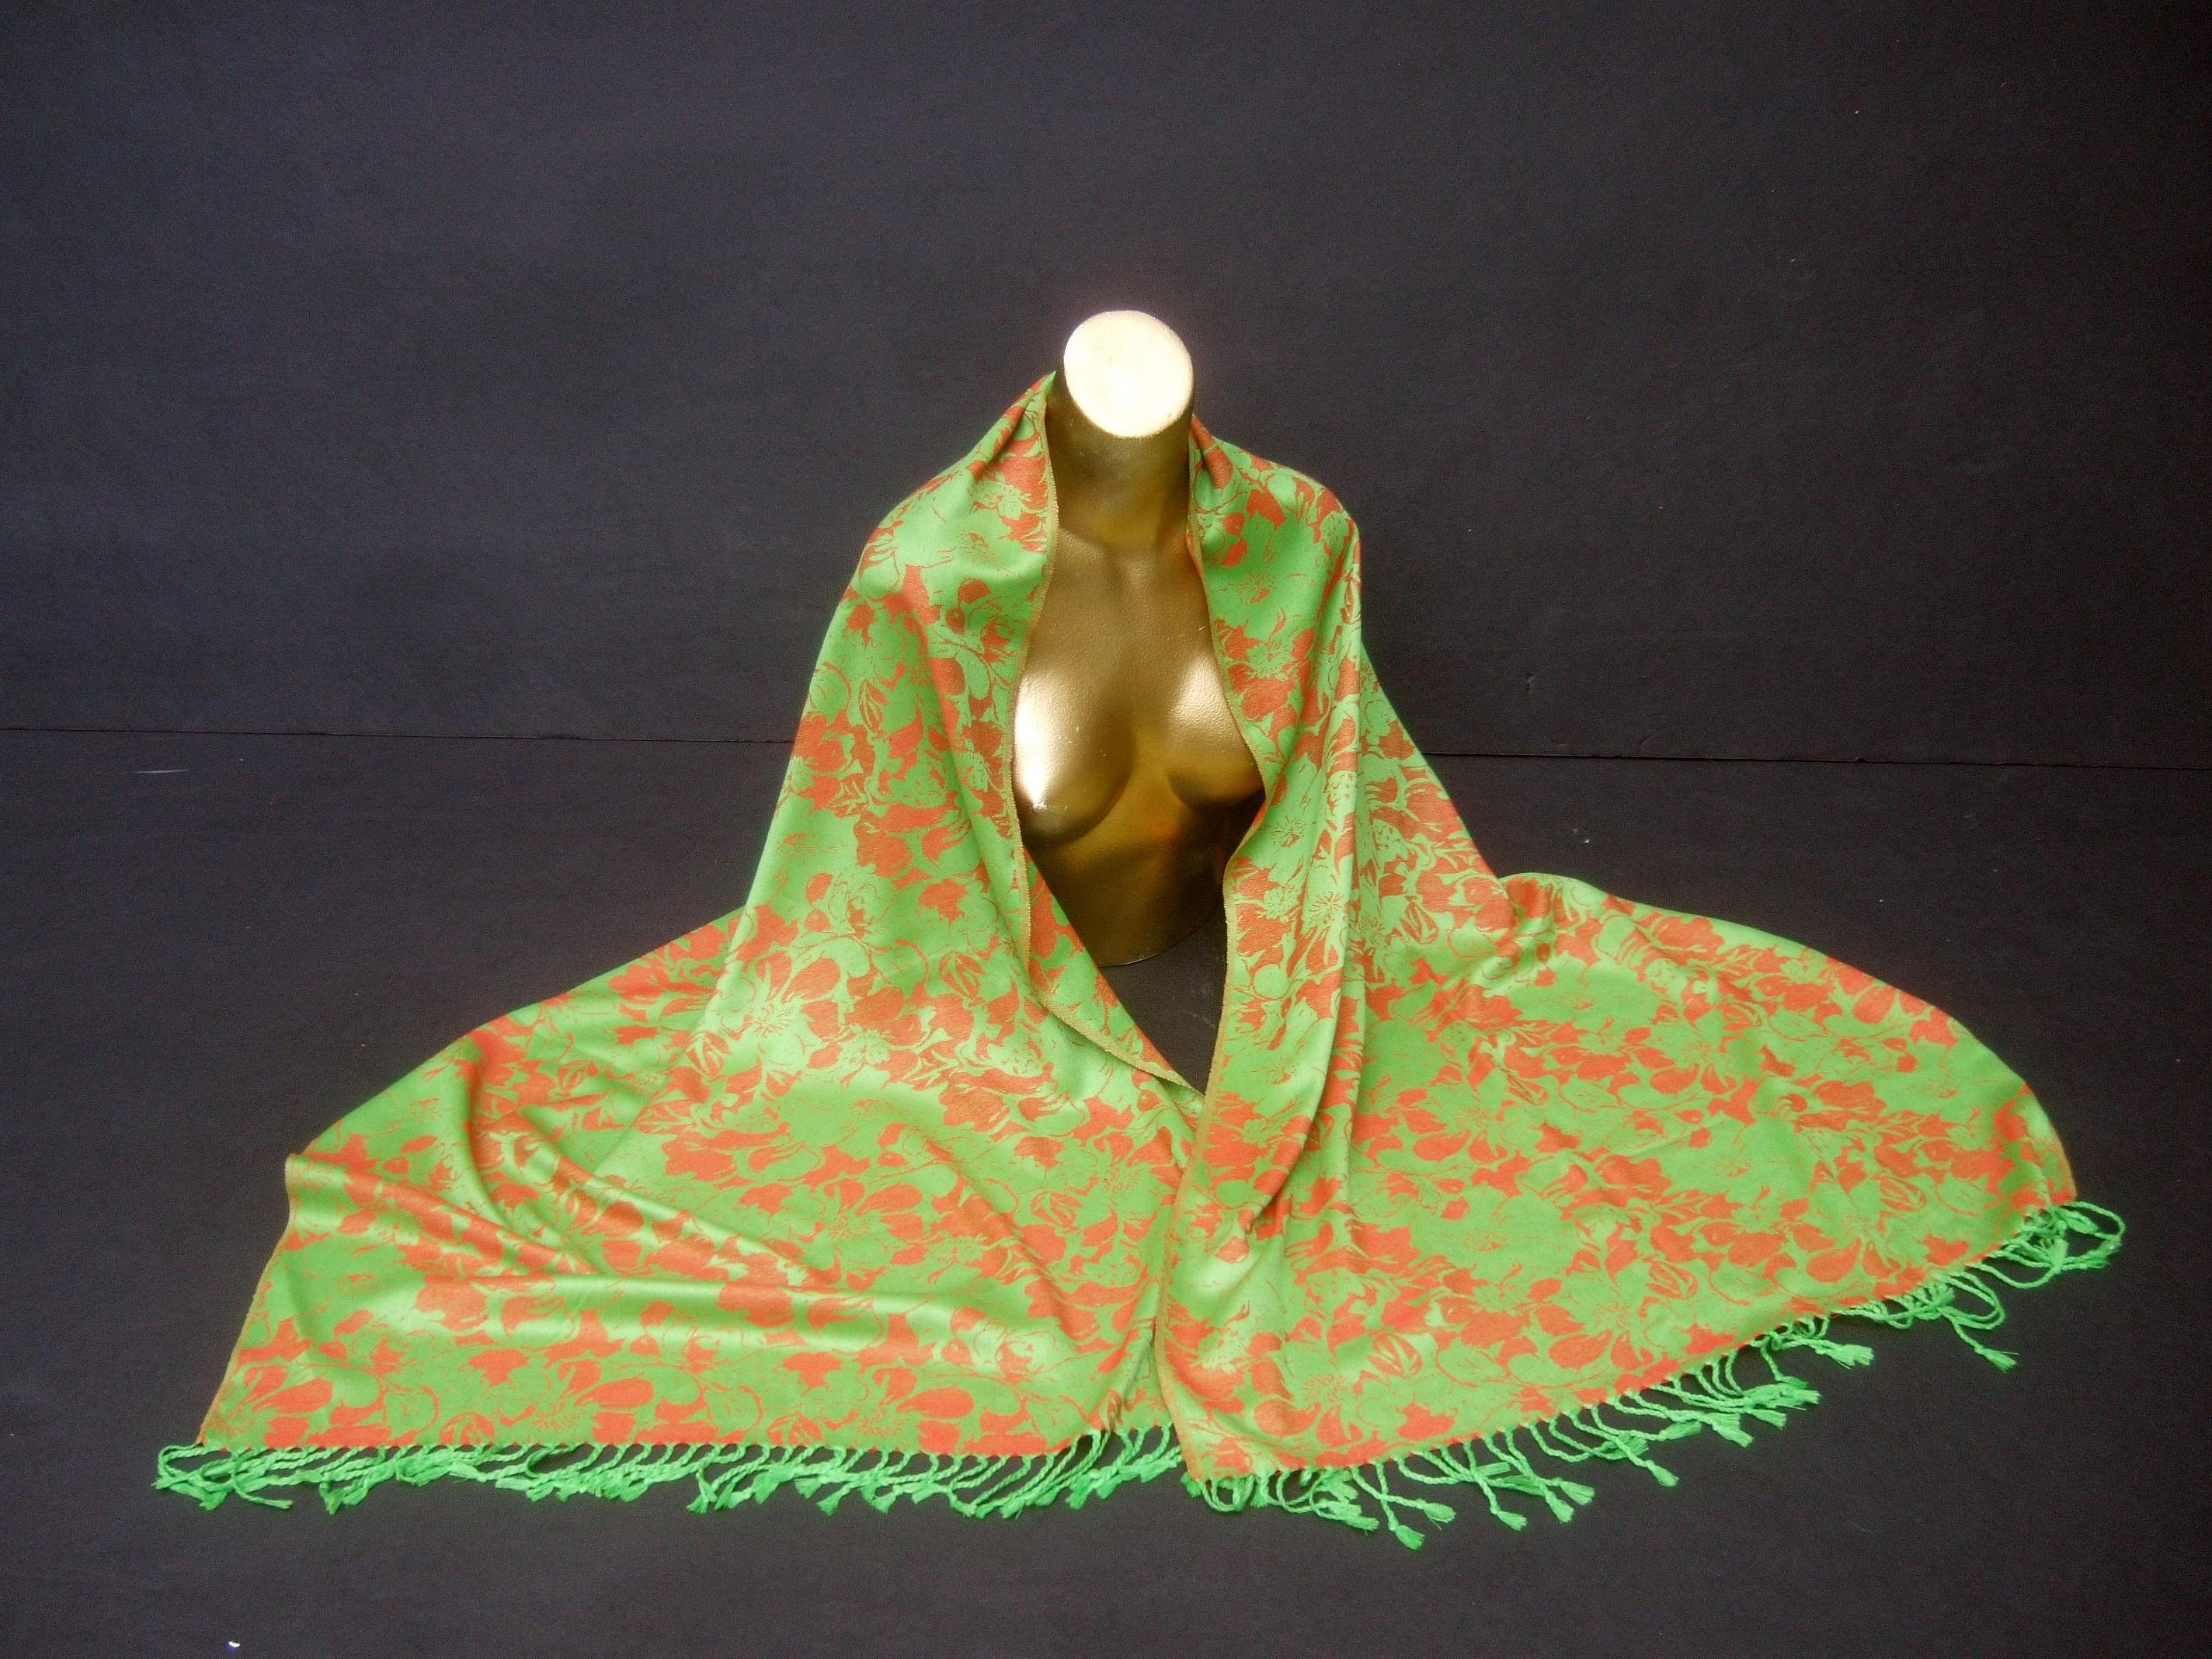 Luxurious cashmere floral print fringe shawl-wrap 74 in x 27 in 
The elegant cashmere shawl wrap is infused with copper-tone color
flower pedals; juxtaposed with a chartreuse apple-green 
background

The versatile textile may be draped over the body